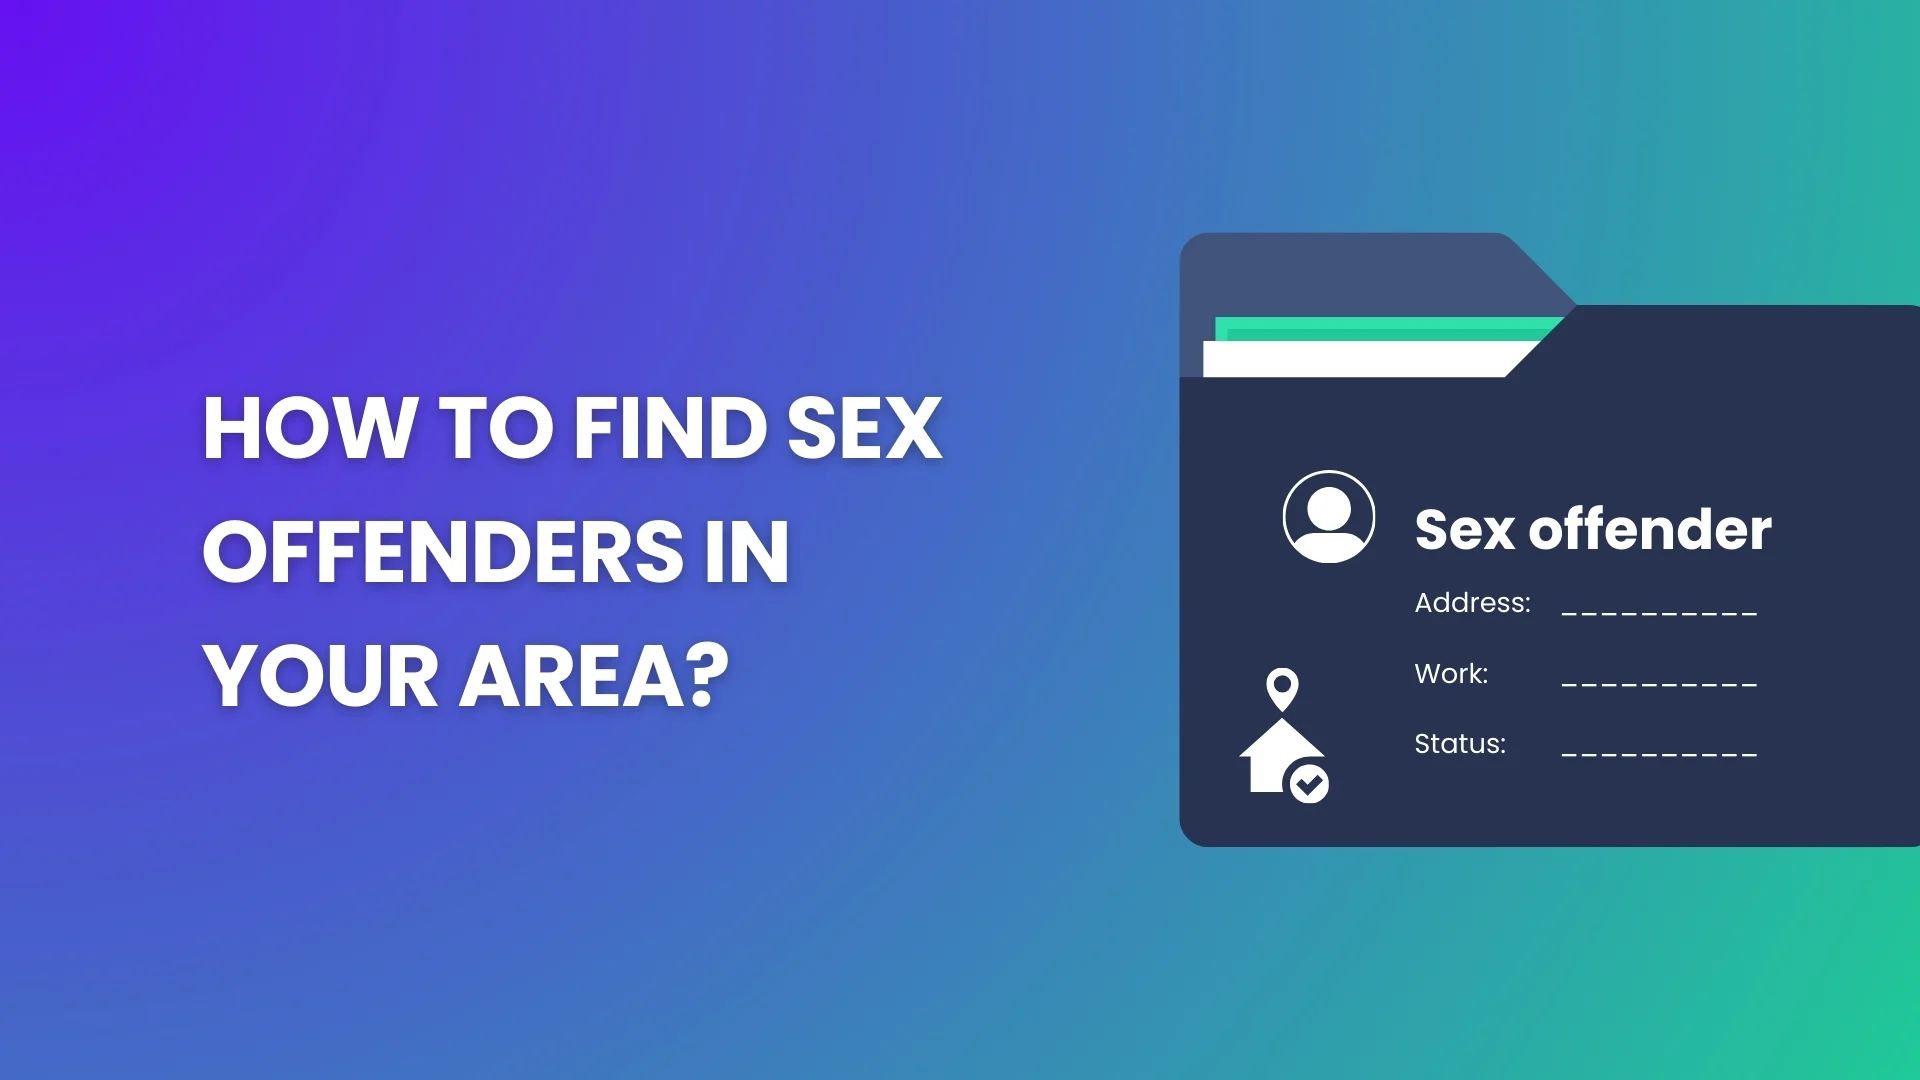 Find sex offenders in my area